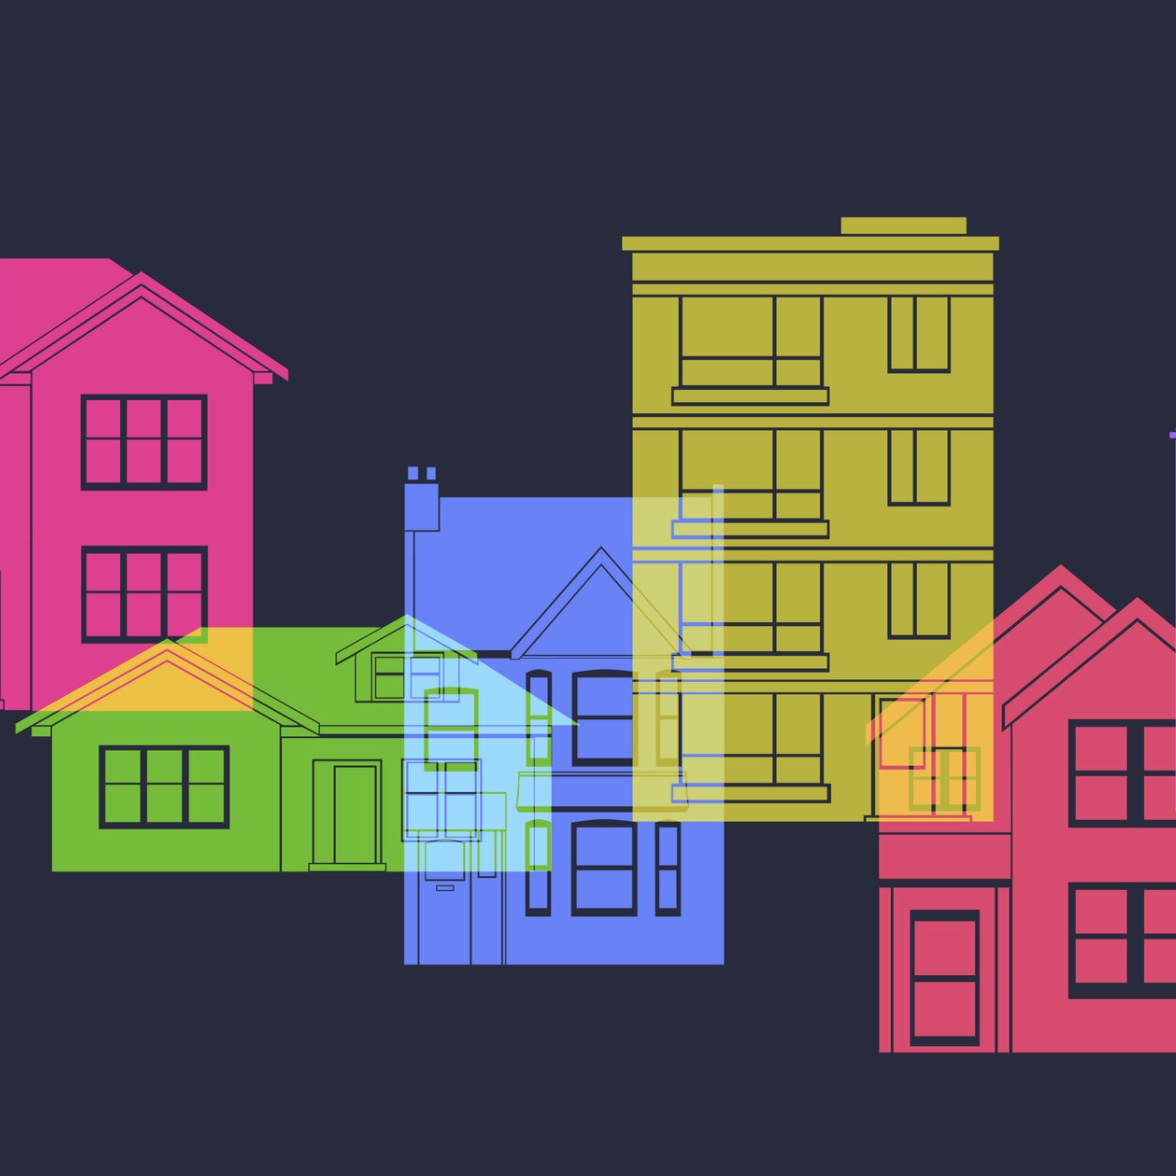 An image of colored houses on a black background